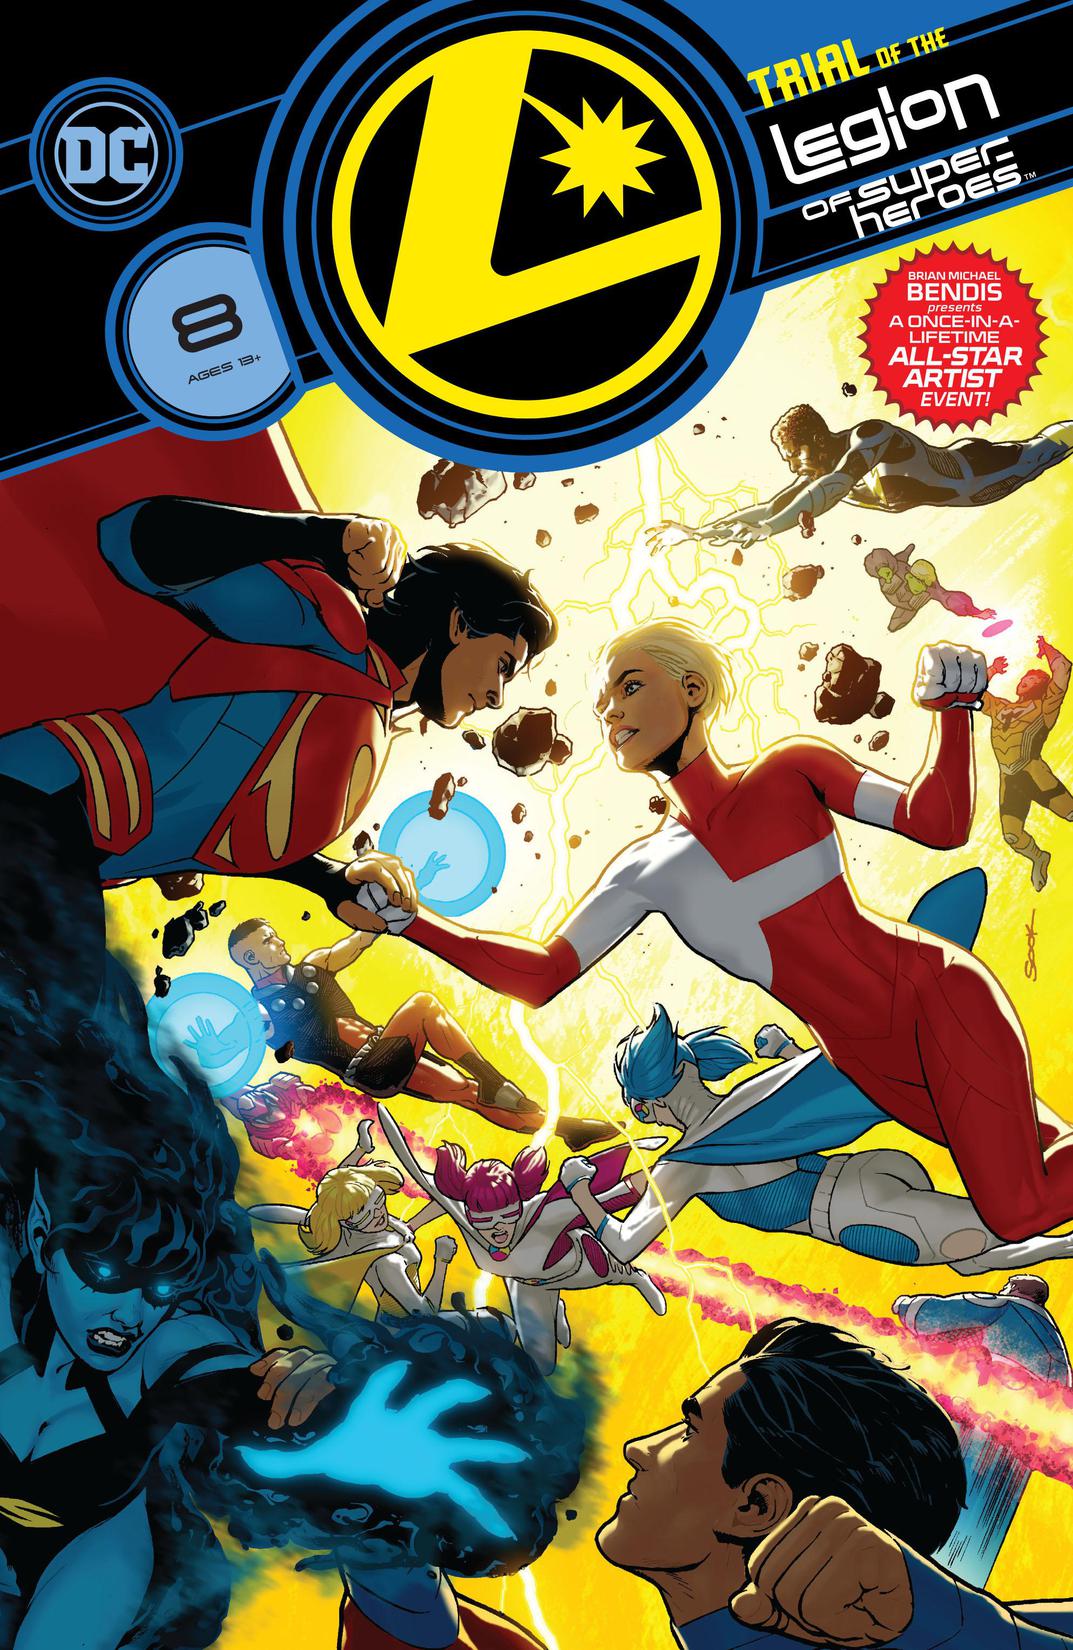 Legion of Super-Heroes (2019-) #8 preview images